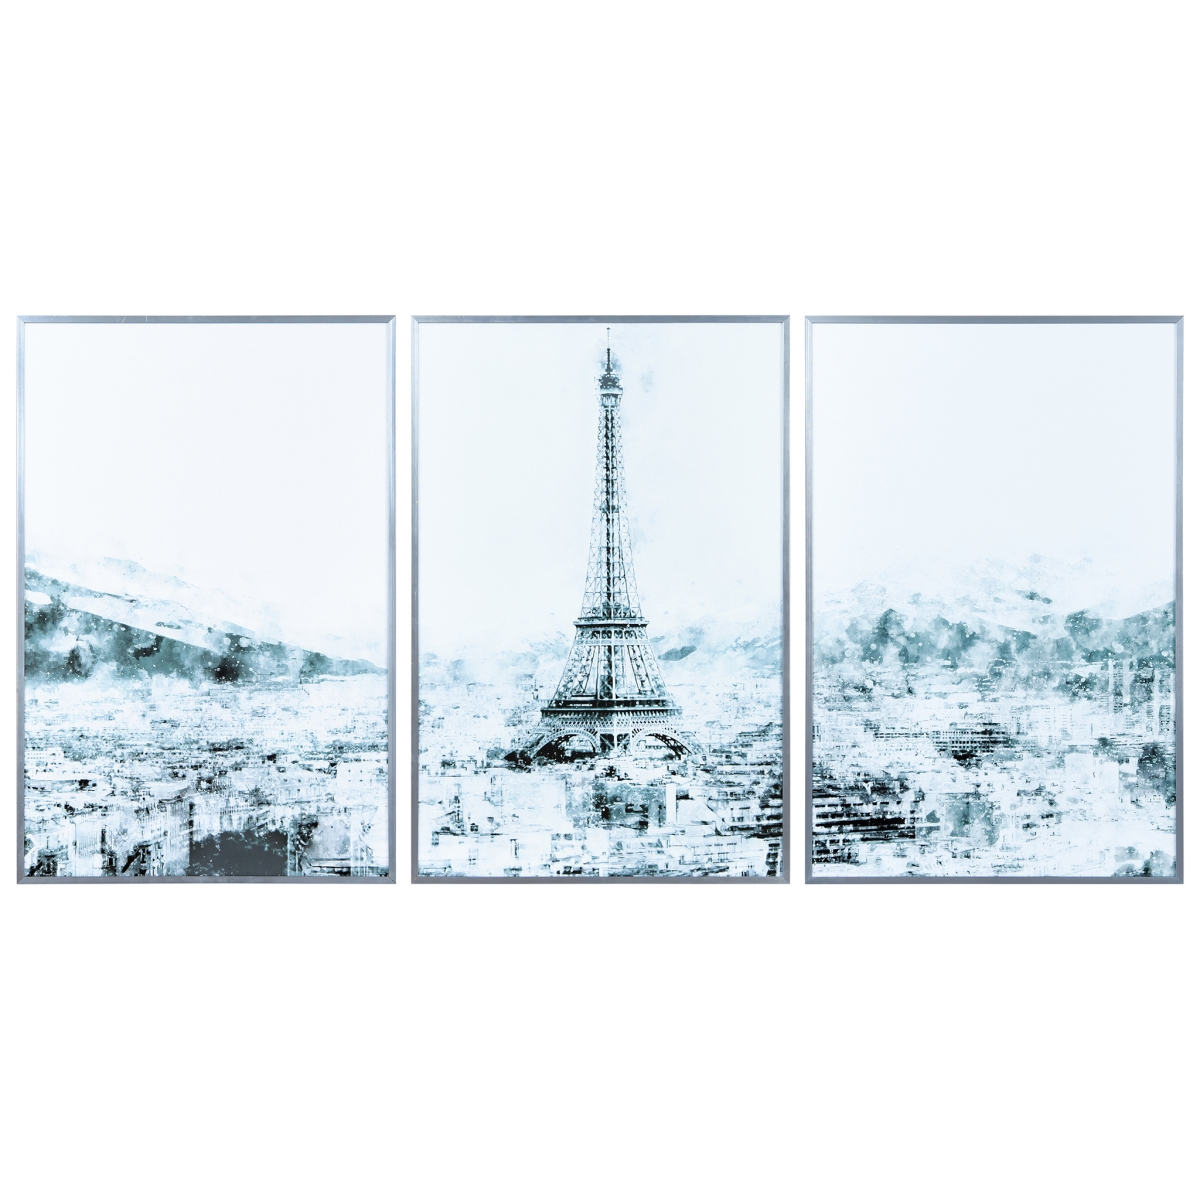 Aags-80123-2416-3 24 X 16 In. Eiffel Tower Reverse Printed Glass & Anodized Aluminum Silver Frame Contemporary Wall Art, 3 Piece